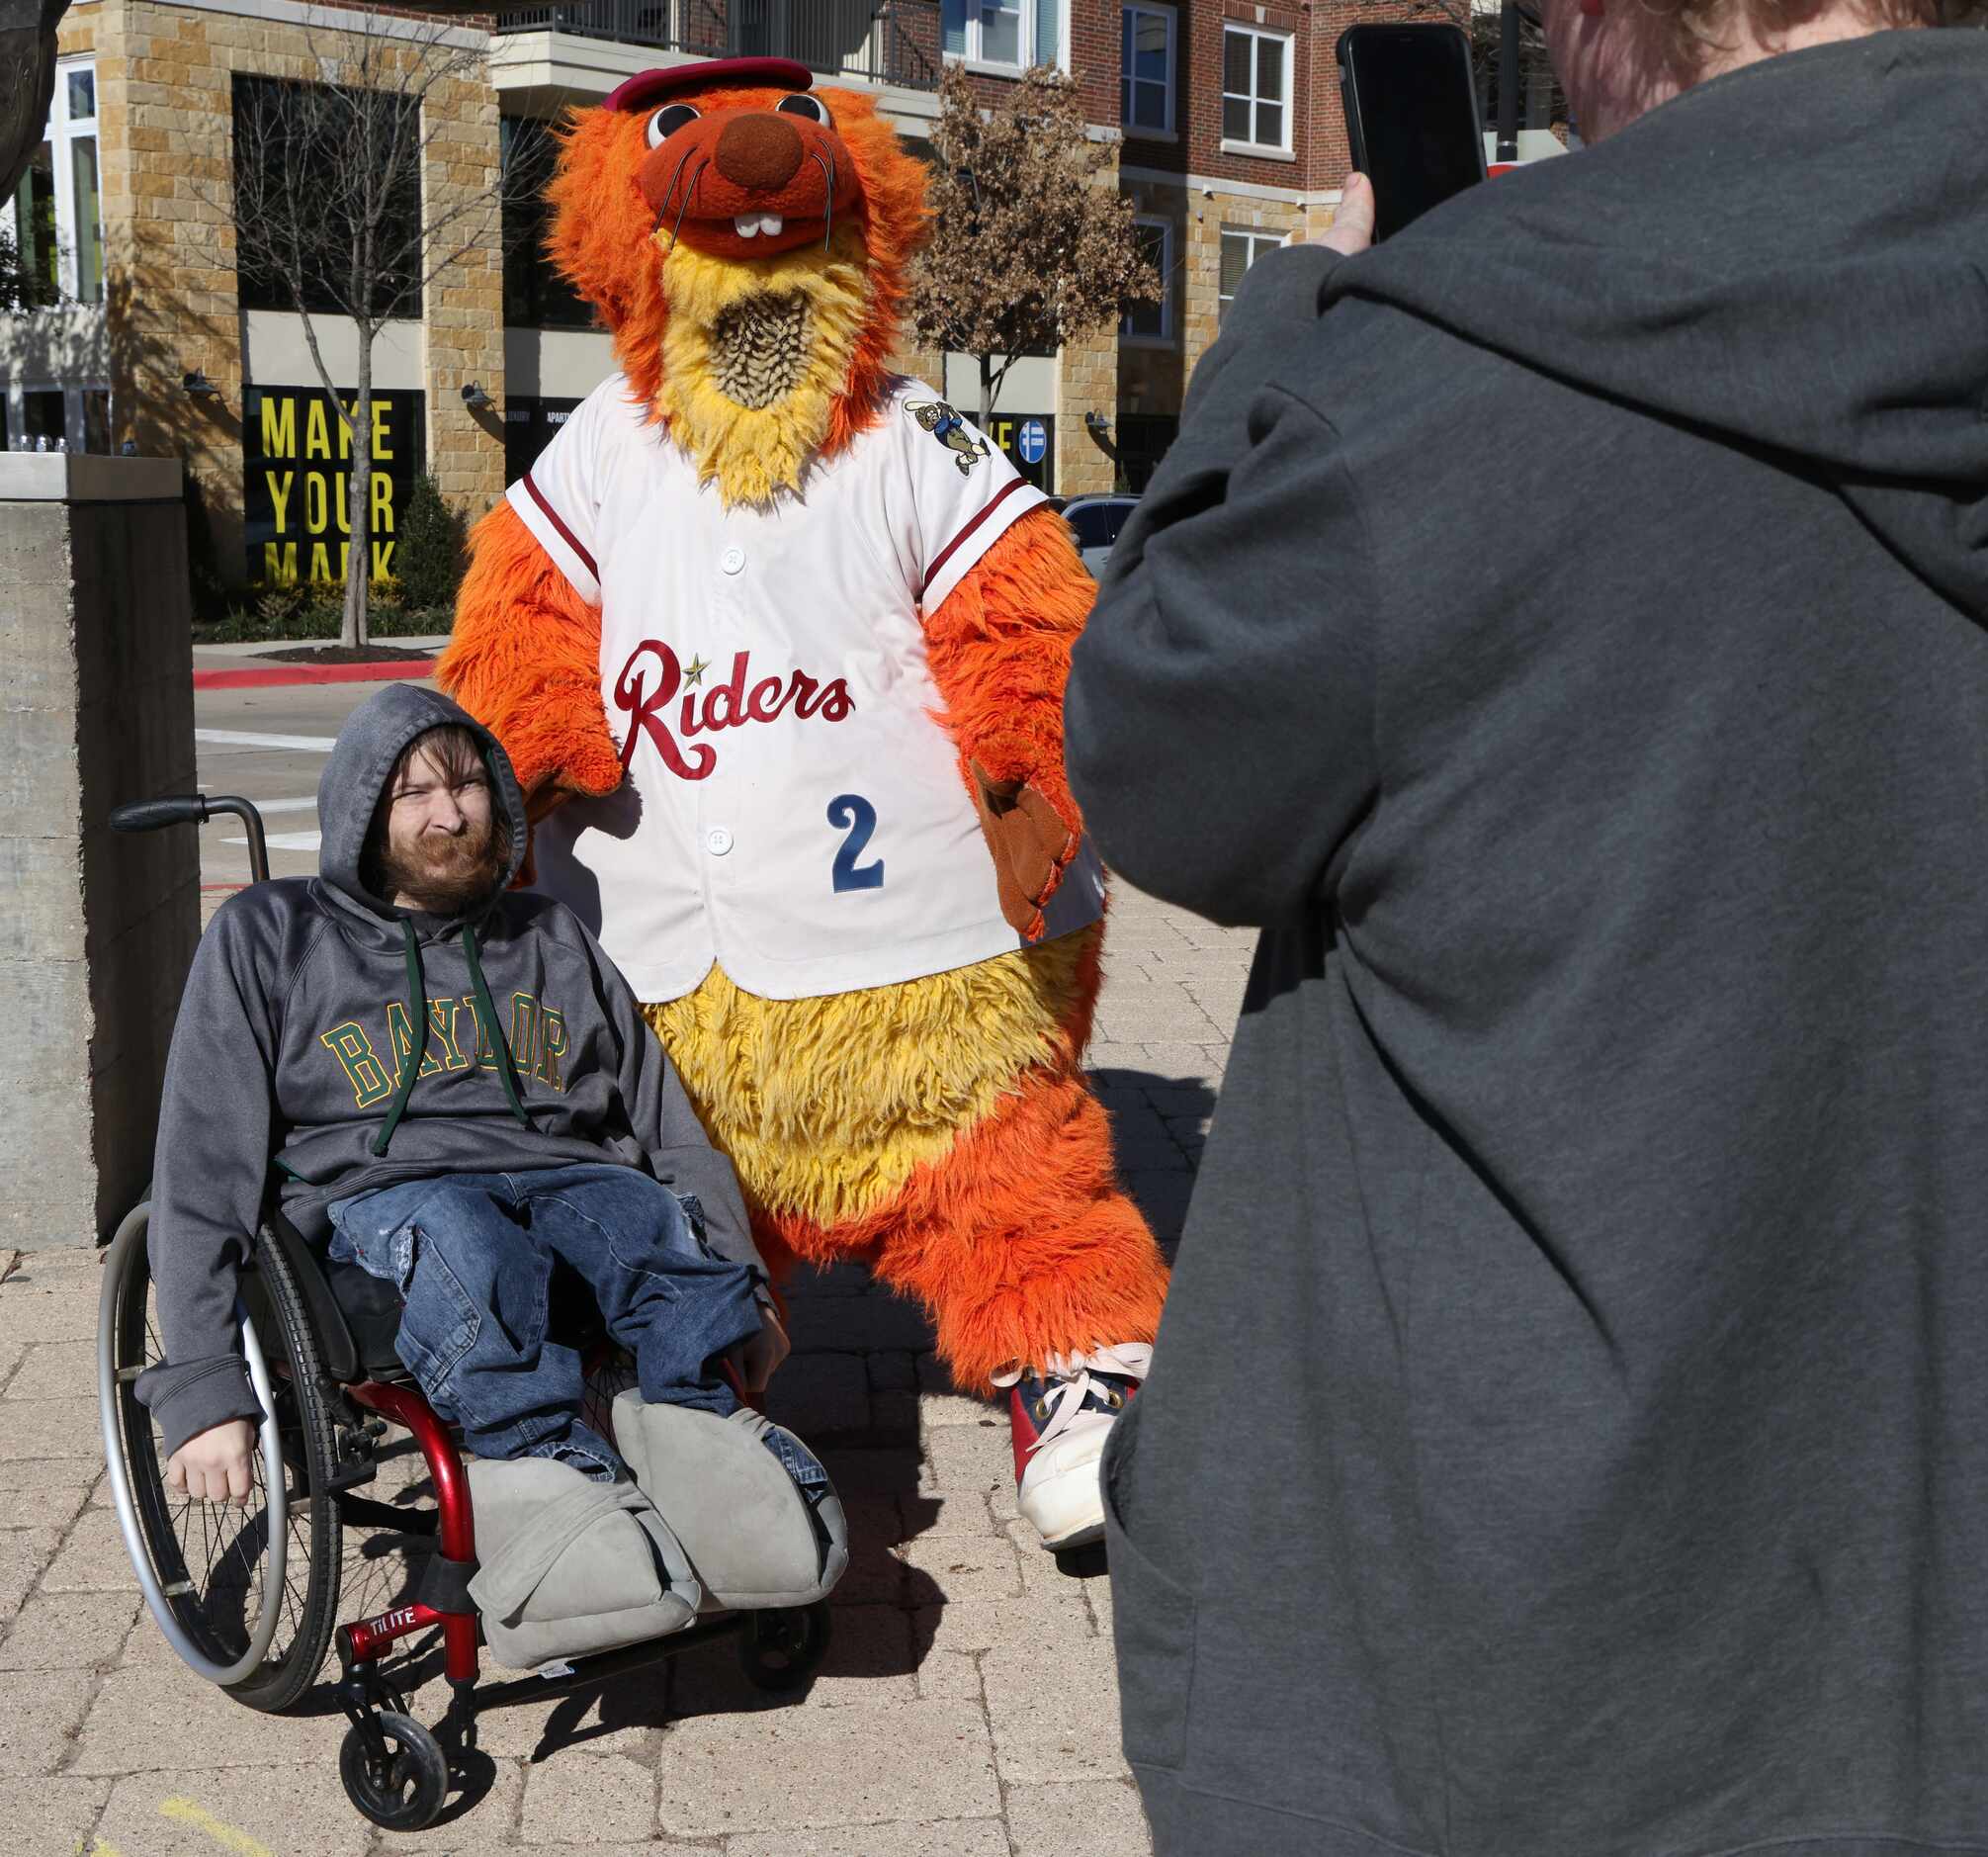 Texas Rangers fan Jacob Fry poses with a photo with Frisco RoughRiders mascot "Deuce"...